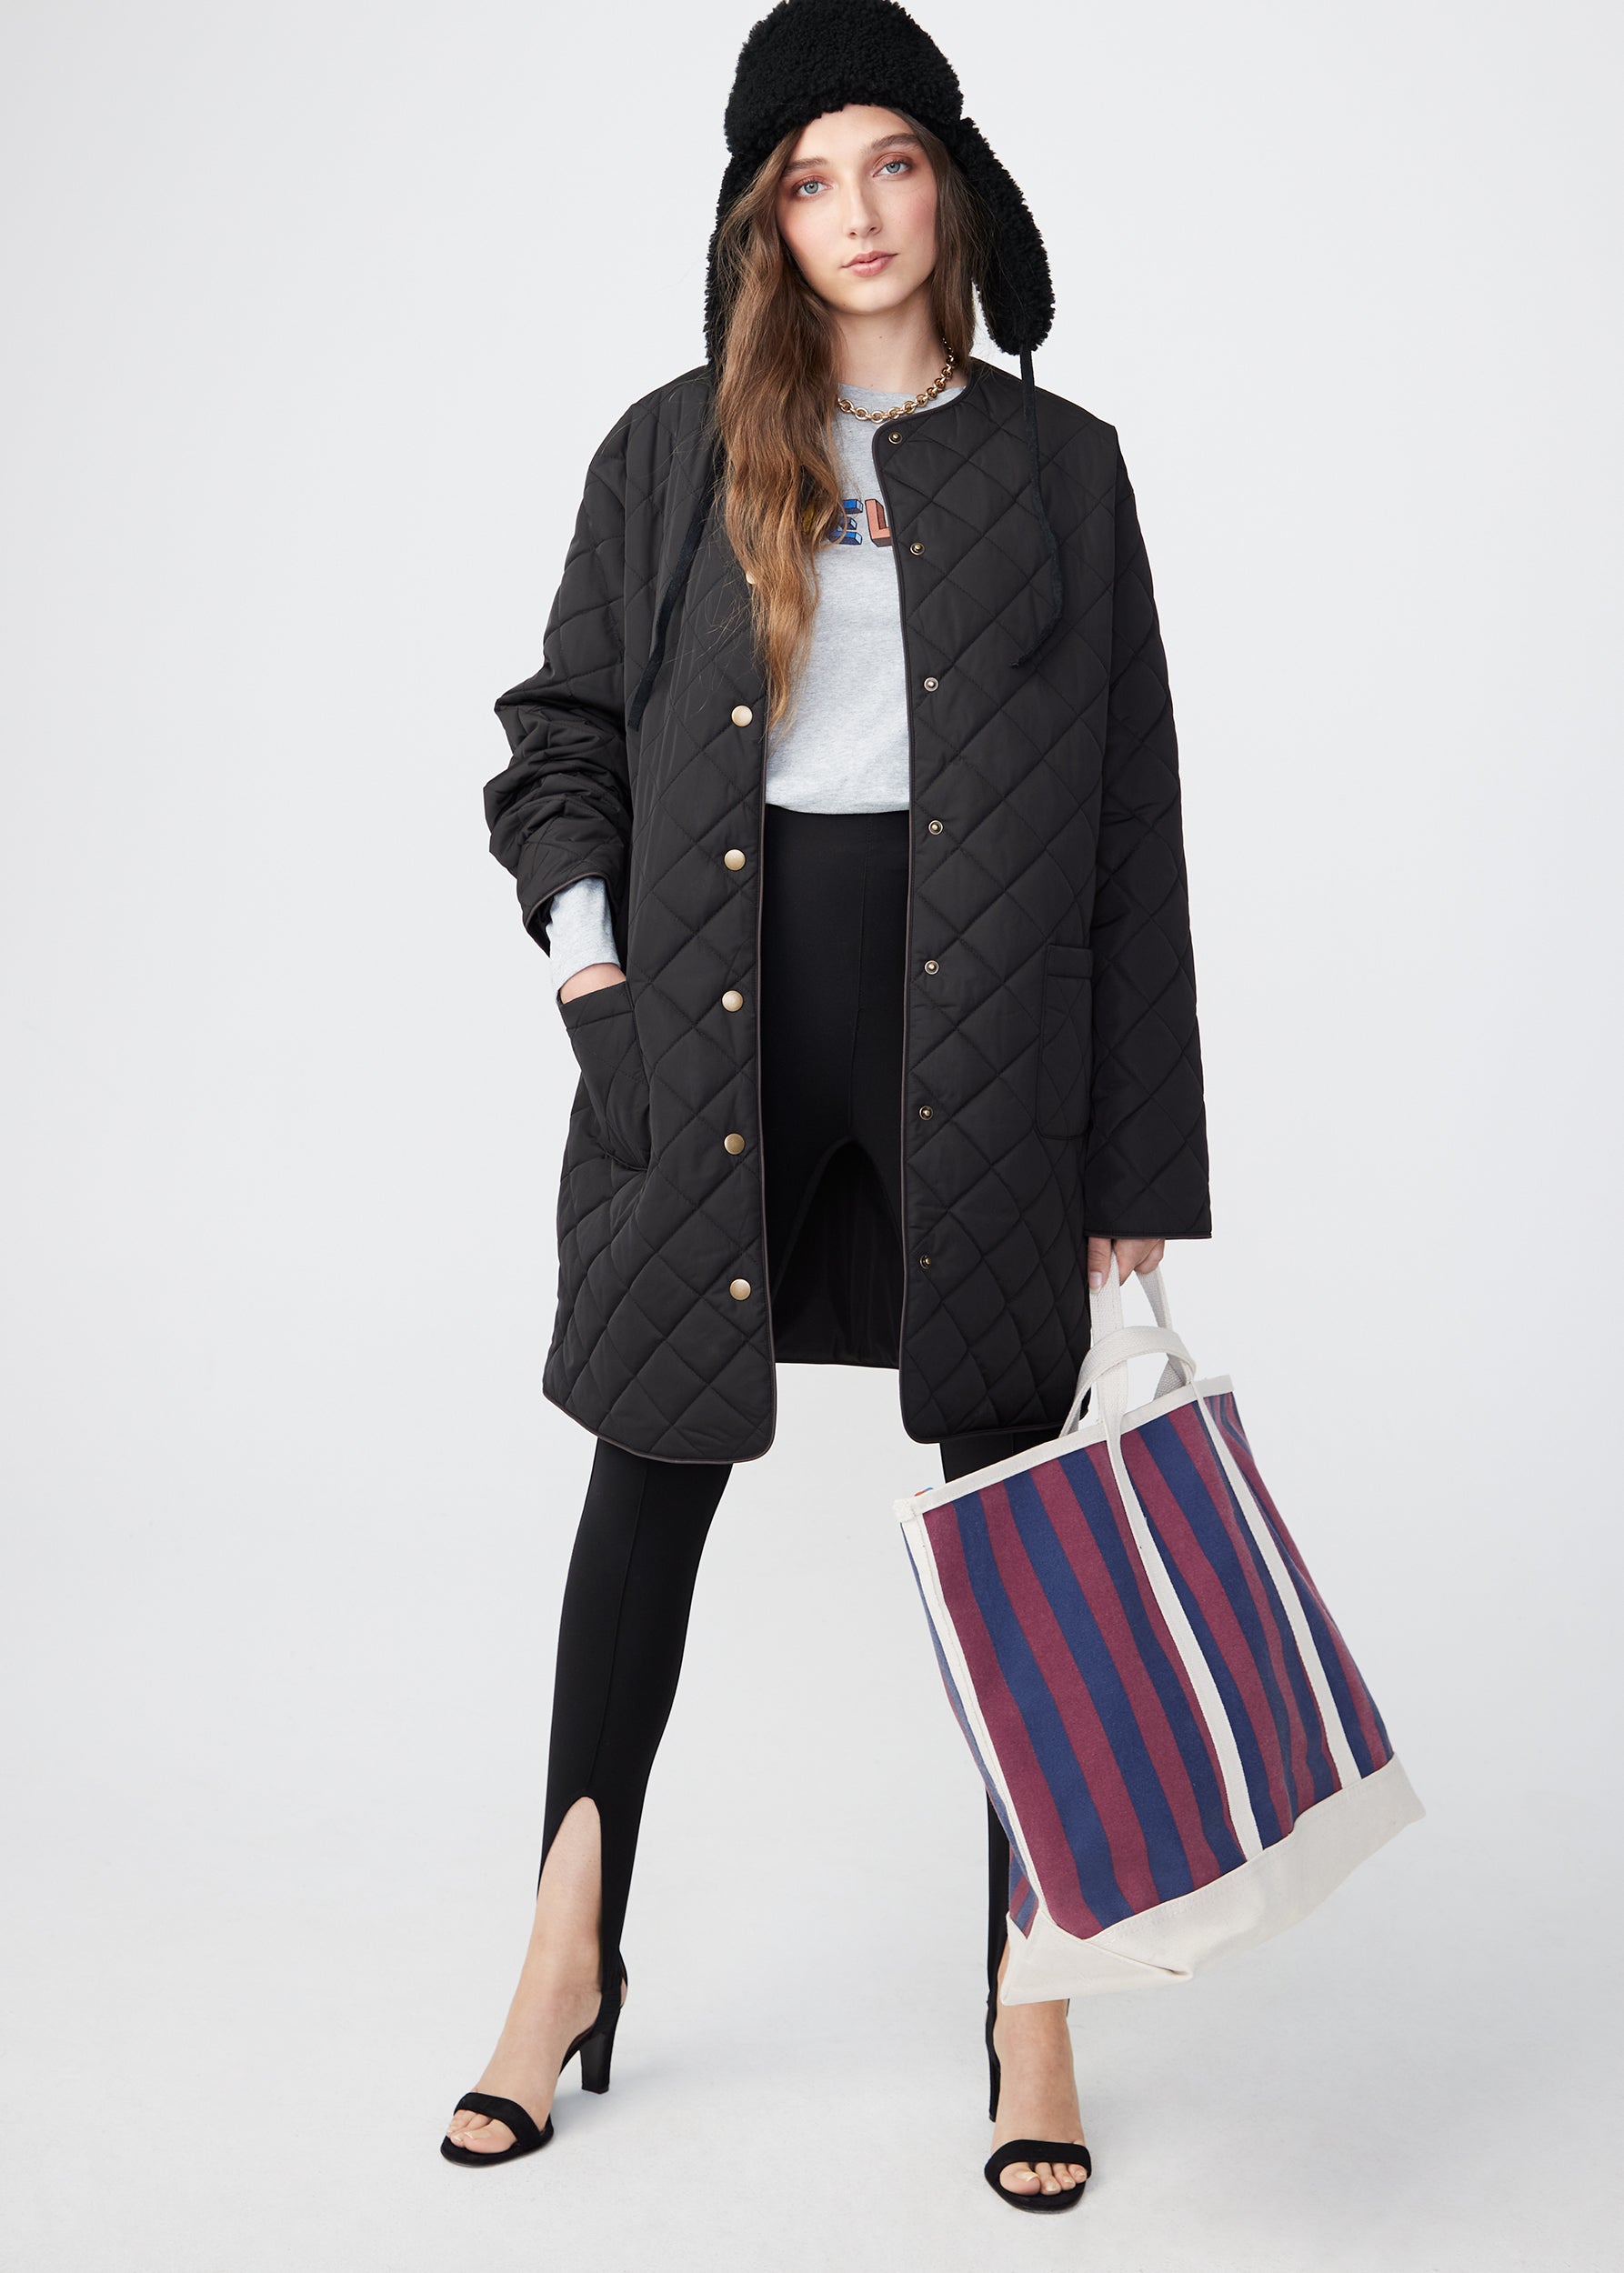 The All Over Striped Tote - Navy/Wine